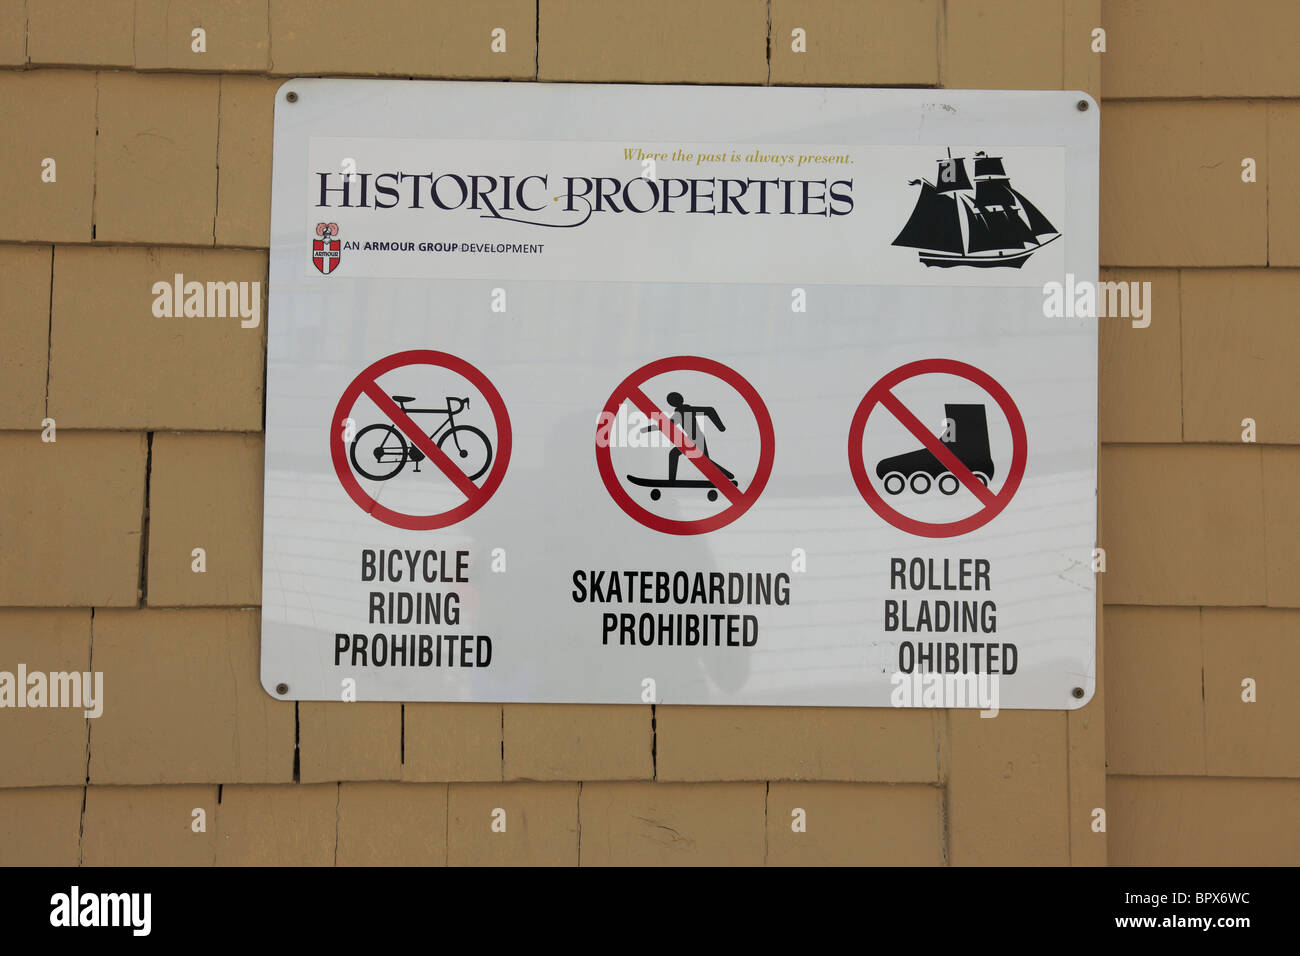 prohibition signs at the Historic Properties at the Harbourwalk, Halifax, Nova Scotia, Atlantic Canada. Photo by Willy Matheisl Stock Photo